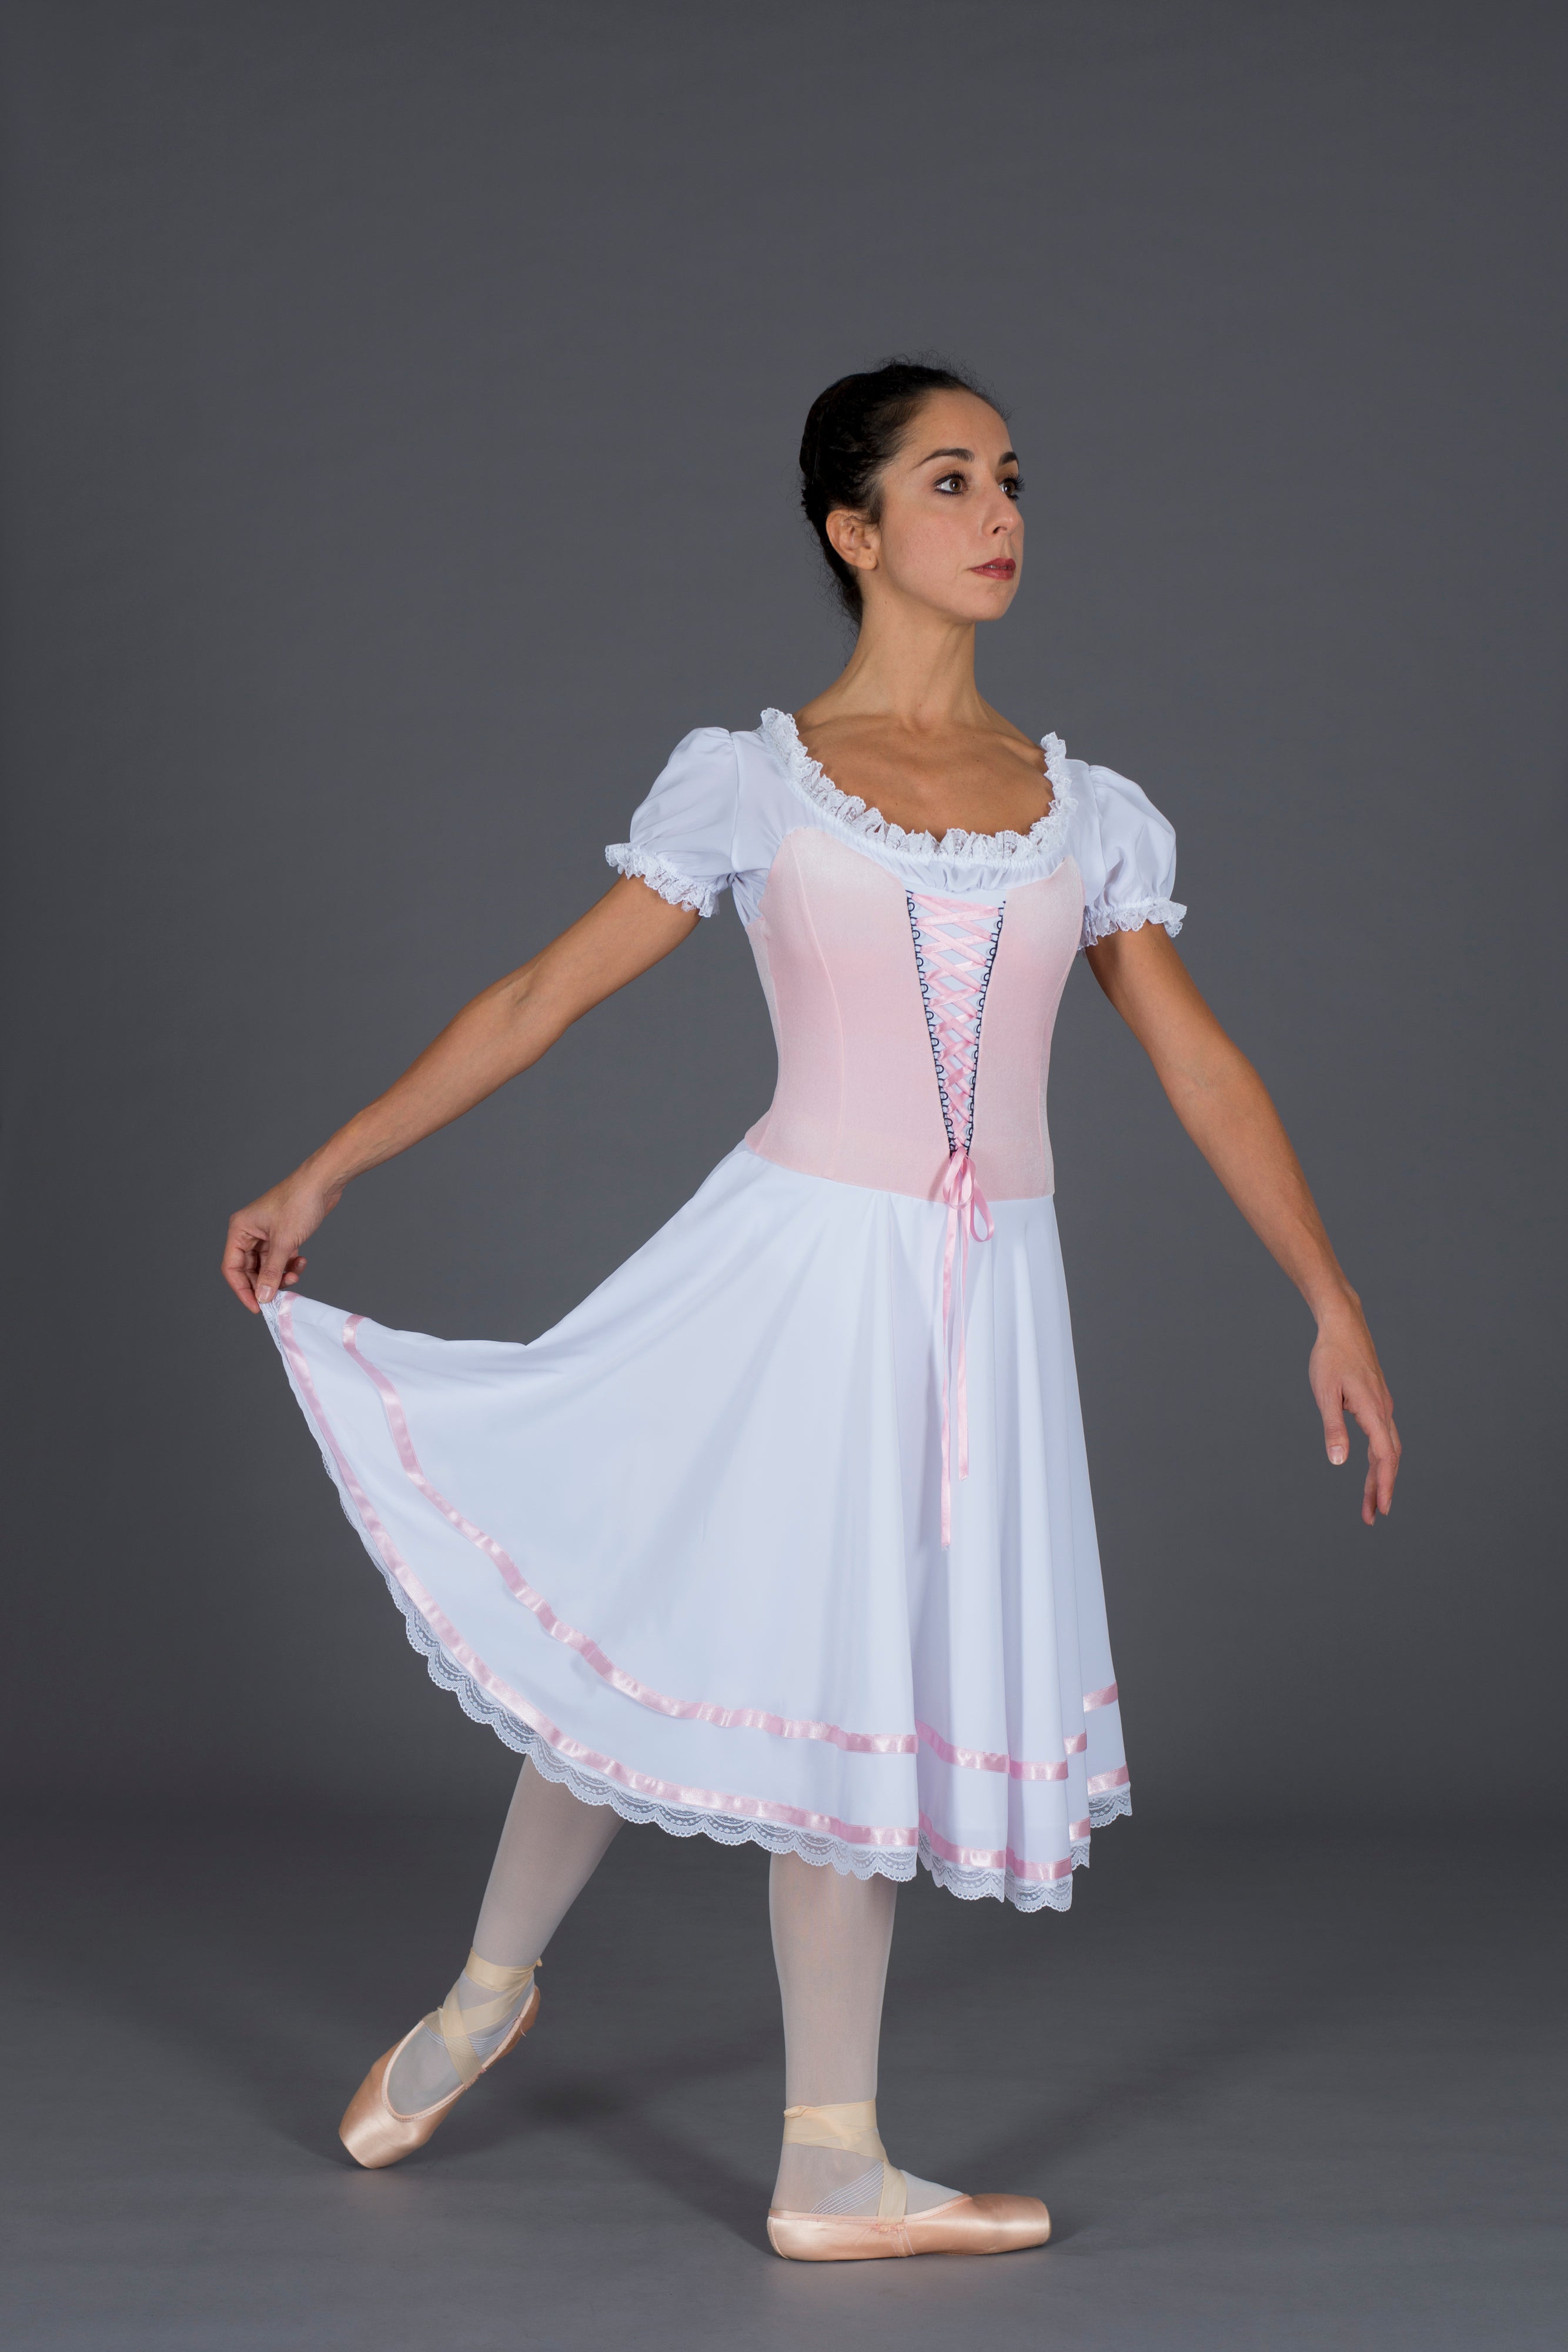 Sale - Giselle Peasant Costume - Dancewear by Patricia